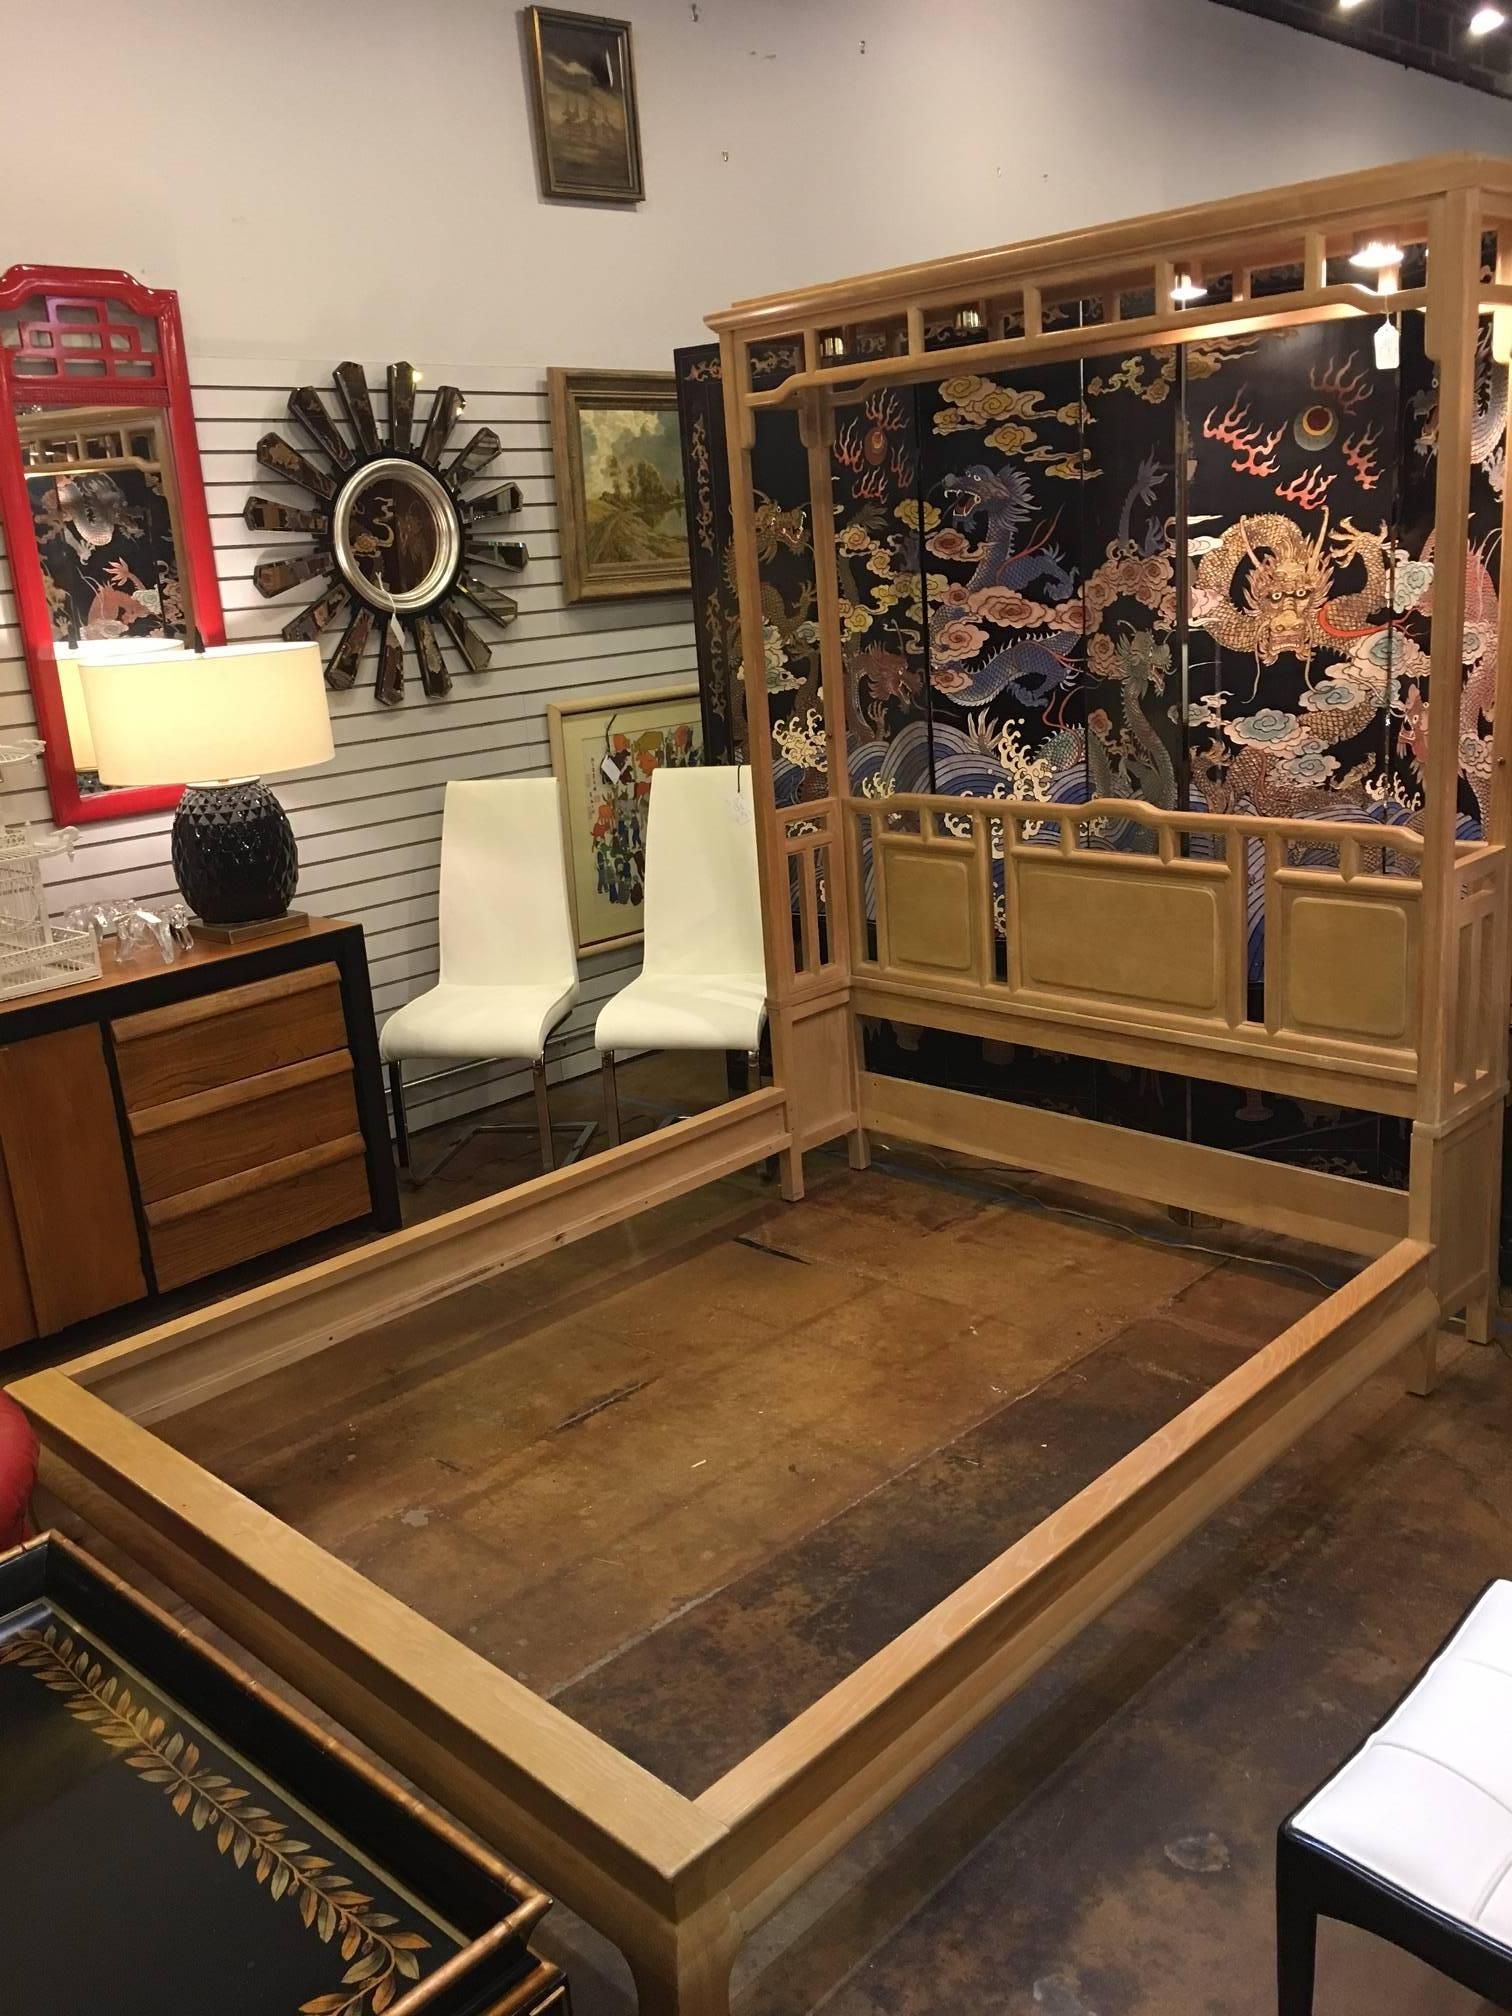 This bed frame is unmarked but we are fairly certain it was made by Century. It is an Asian style with ming feet, chinoiserie detailing and a reading canopy with lighting. I has minor scuffs and signs of wear, but is very sturdy and all parts are